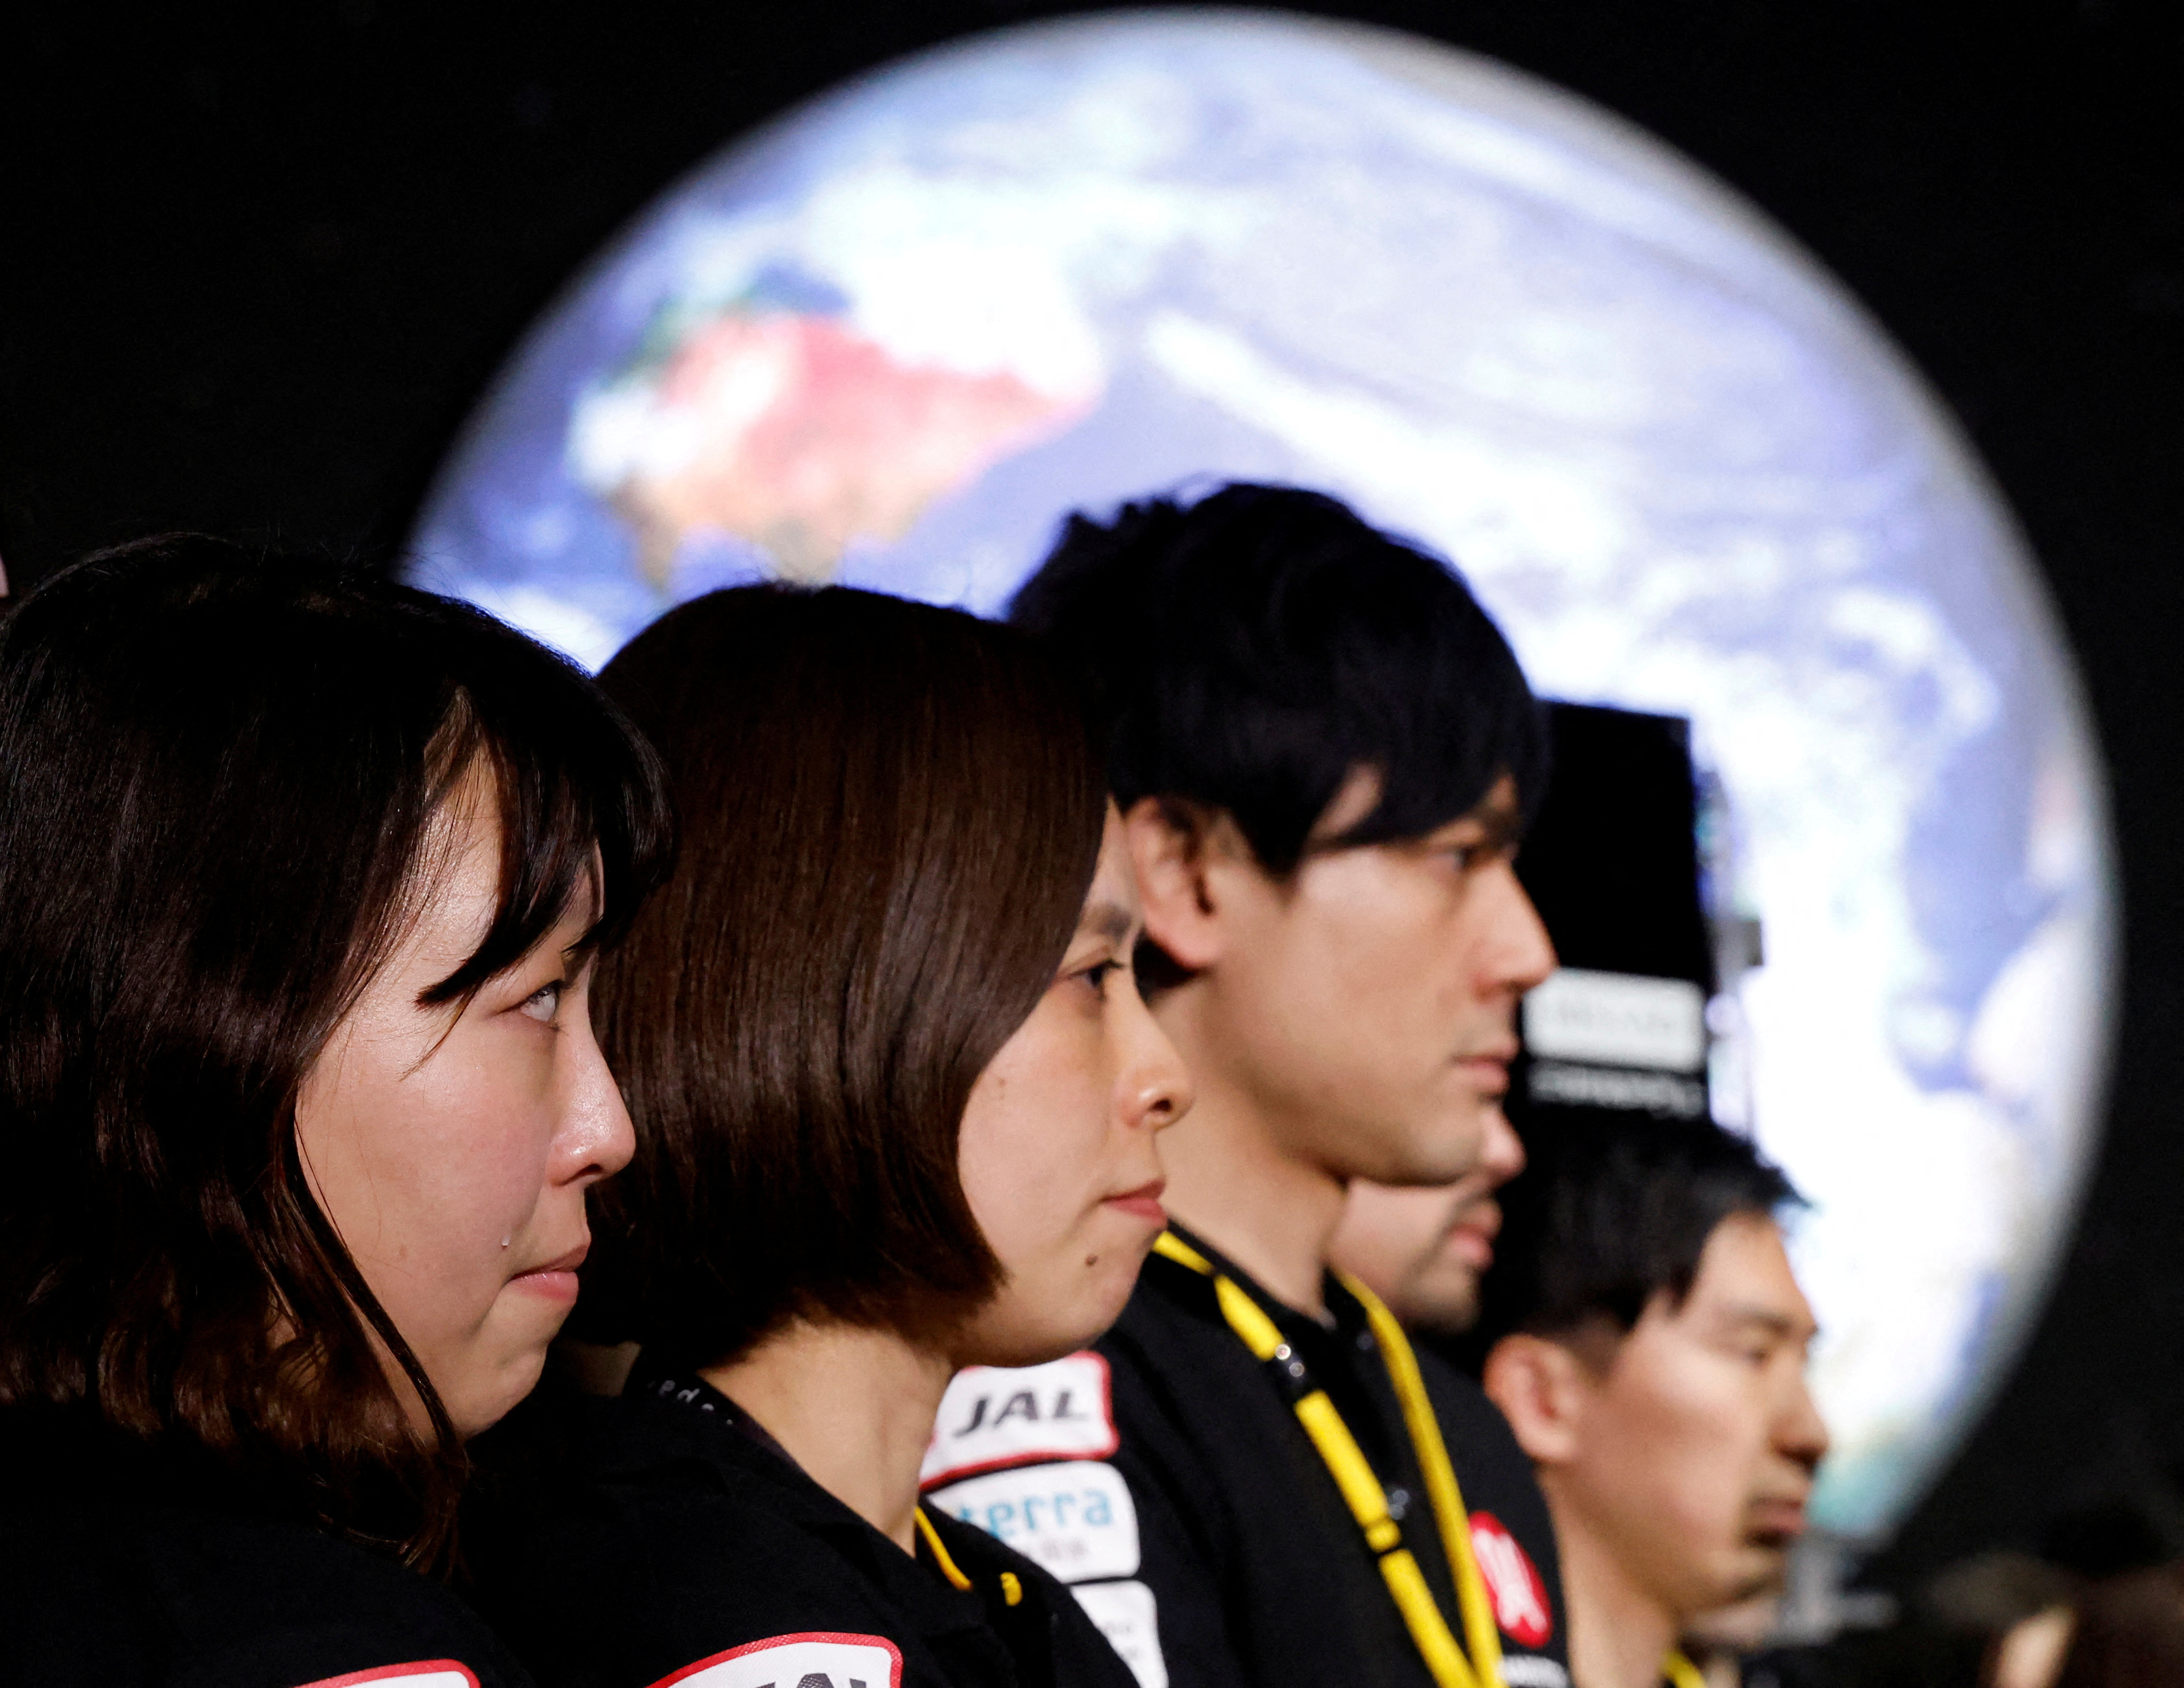 Employees of "ispace" react after the company announced they lost signal from the lander in HAKUTO-R lunar exploration program on the Moon at a venue to watch its landing in Tokyo